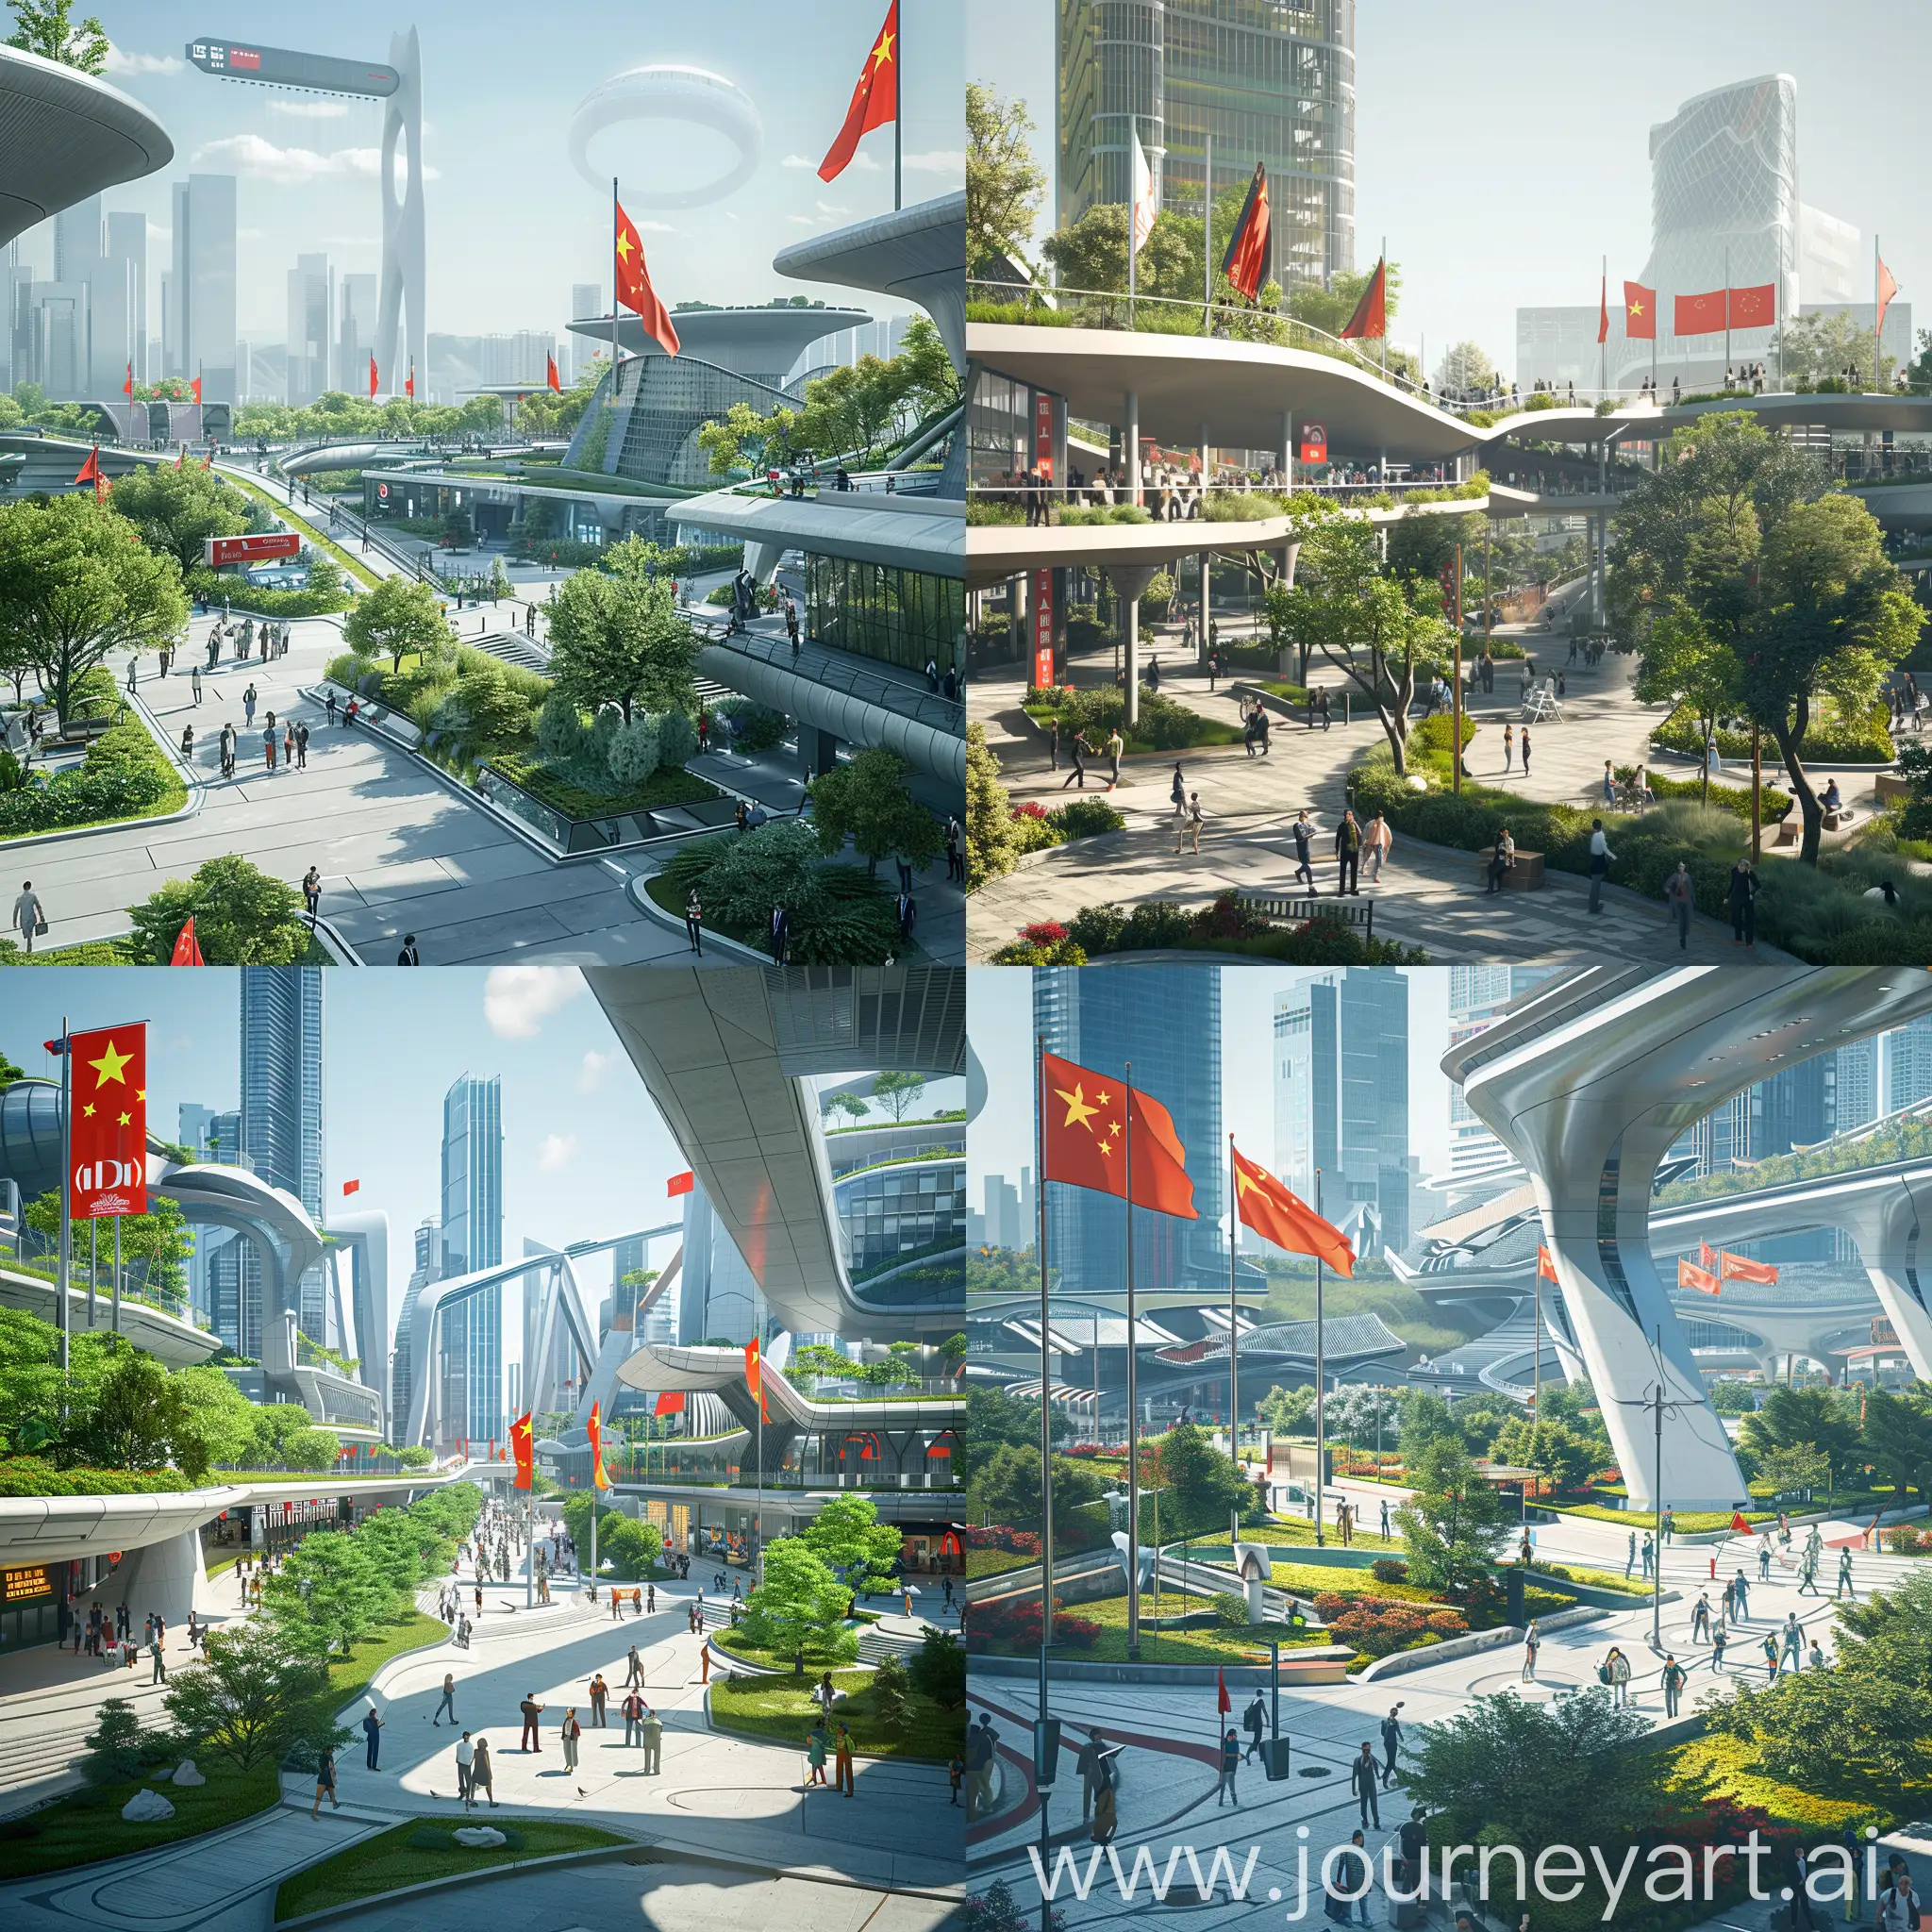 Vibrant and futuristic innovation park in the heart of Shenzhen, China, symbolizing the dynamic growth and vibrancy of the Chinese economy. The scene is bustling with activity, showcasing a blend of advanced technology and green spaces, with people of various professions interacting and collaborating. Prominently displayed are flags and symbols representing the support and backing of the Communist Party, reflecting the harmony between innovation and governmental vision. The image should be photorealistic, capturing the essence of a thriving, modern Chinese cityscape, as seen through the lens of Midjourney v6's photorealistic image generation capabilities